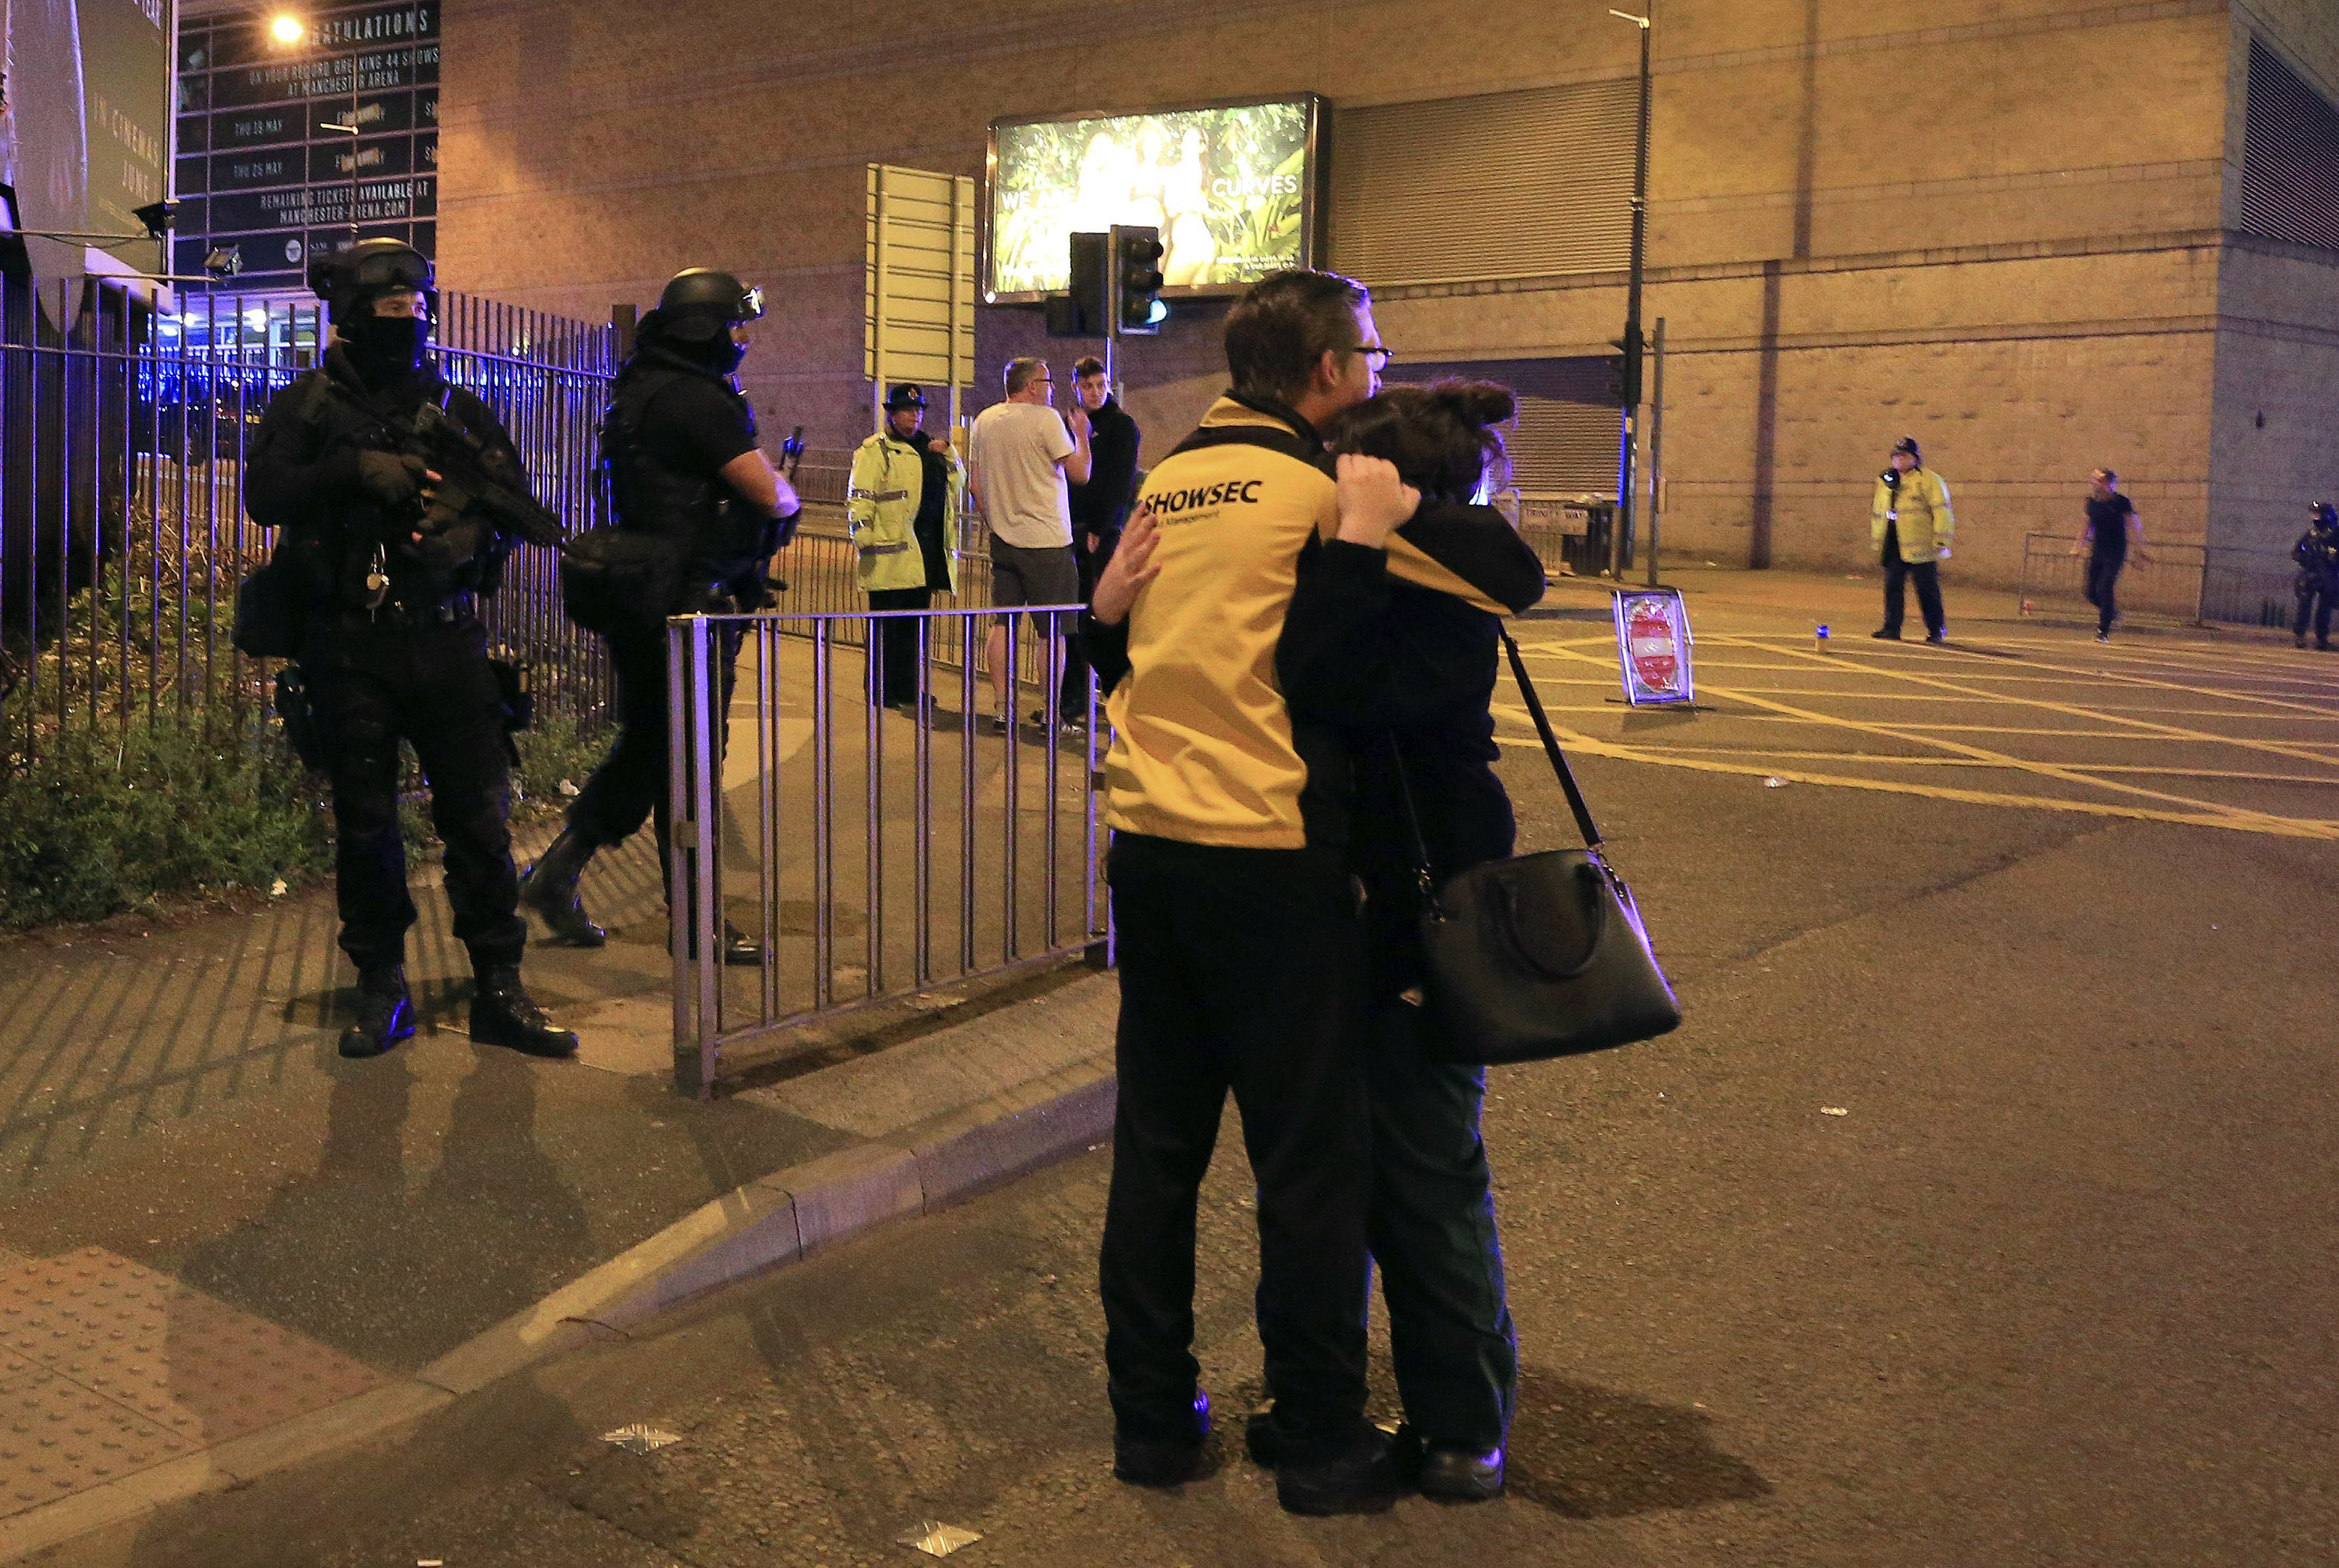 Armed police stand guard at Manchester Arena after reports of an explosion at the venue during an Ariana Grande gig  in Manchester, England Monday, May 22, 2017. Police says there are "a number of fatalities" after reports of an explosion at an Ariana Grande concert in northern England. (Peter Byrne/PA via AP)